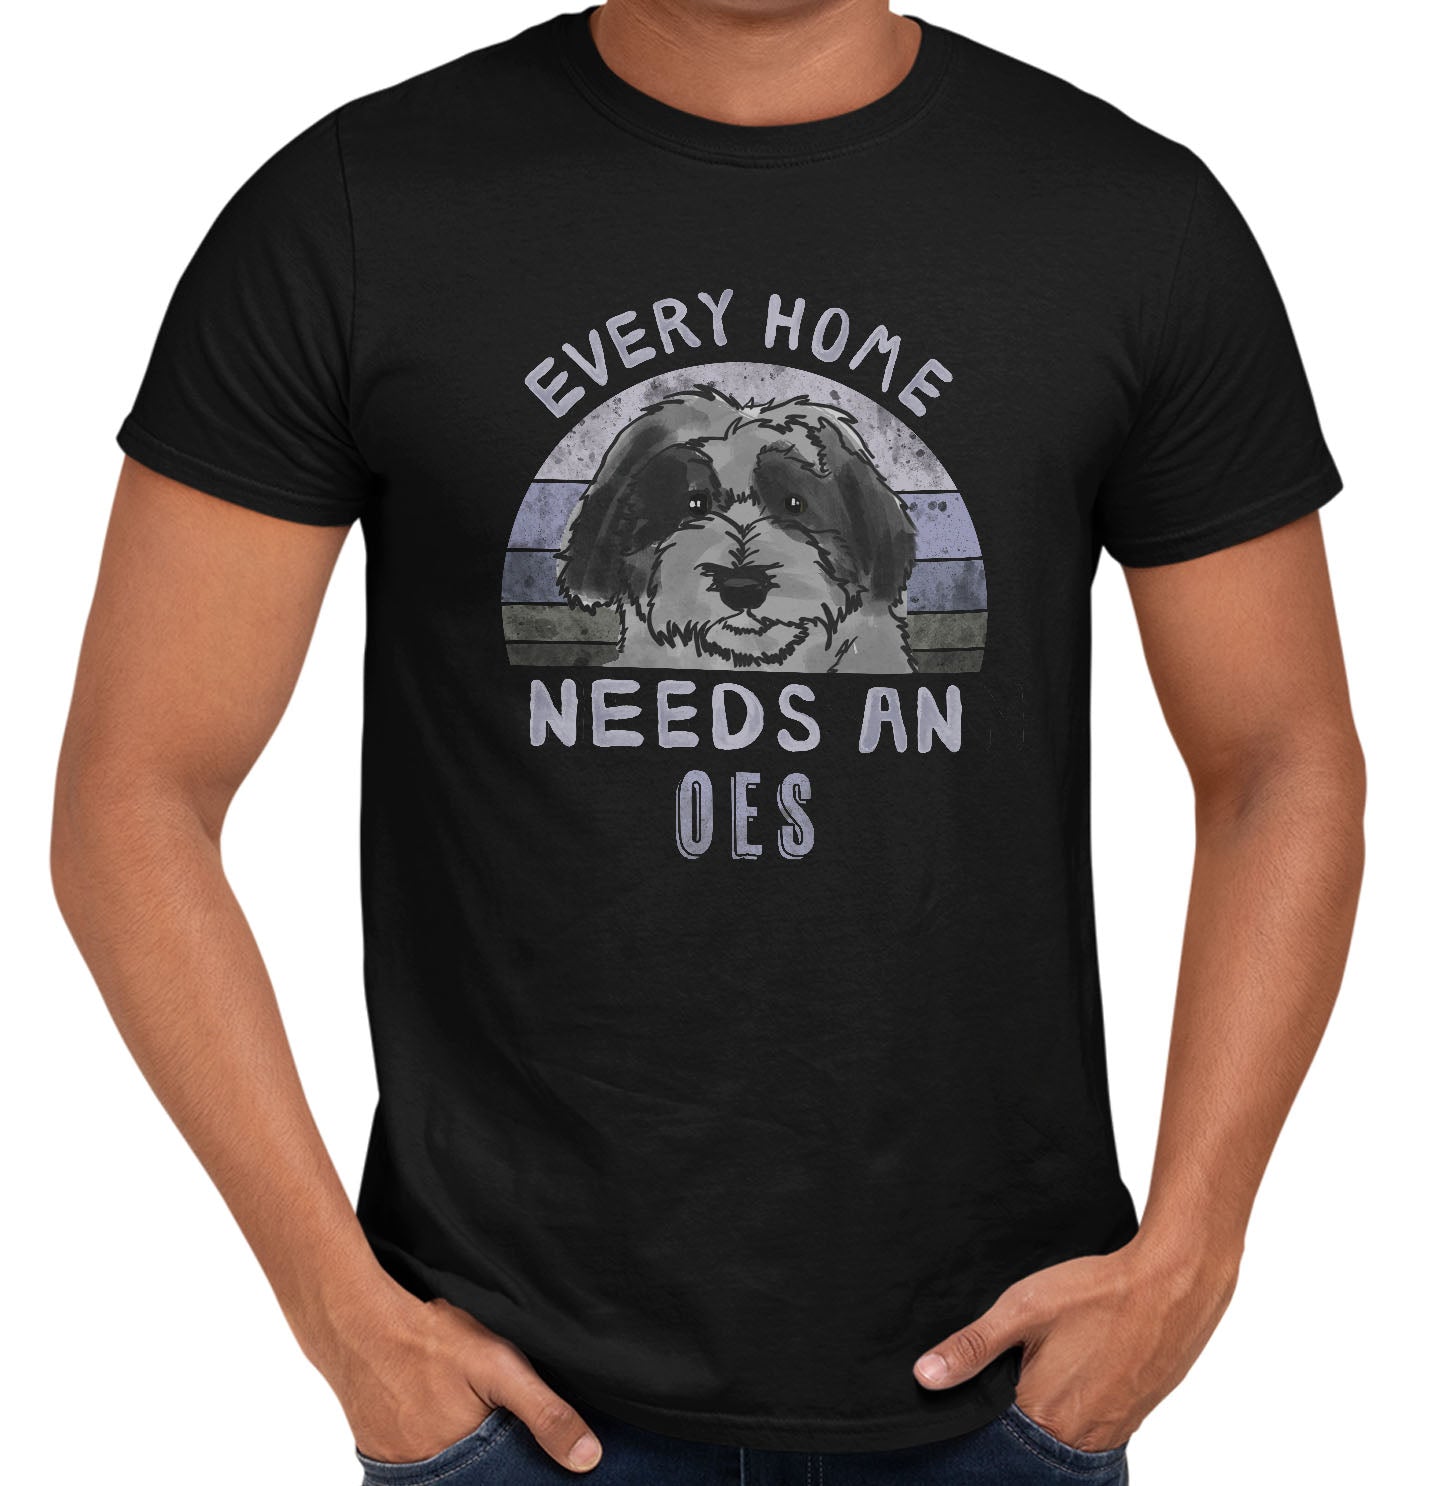 Every Home Needs a Old English Sheepdog - Adult Unisex T-Shirt